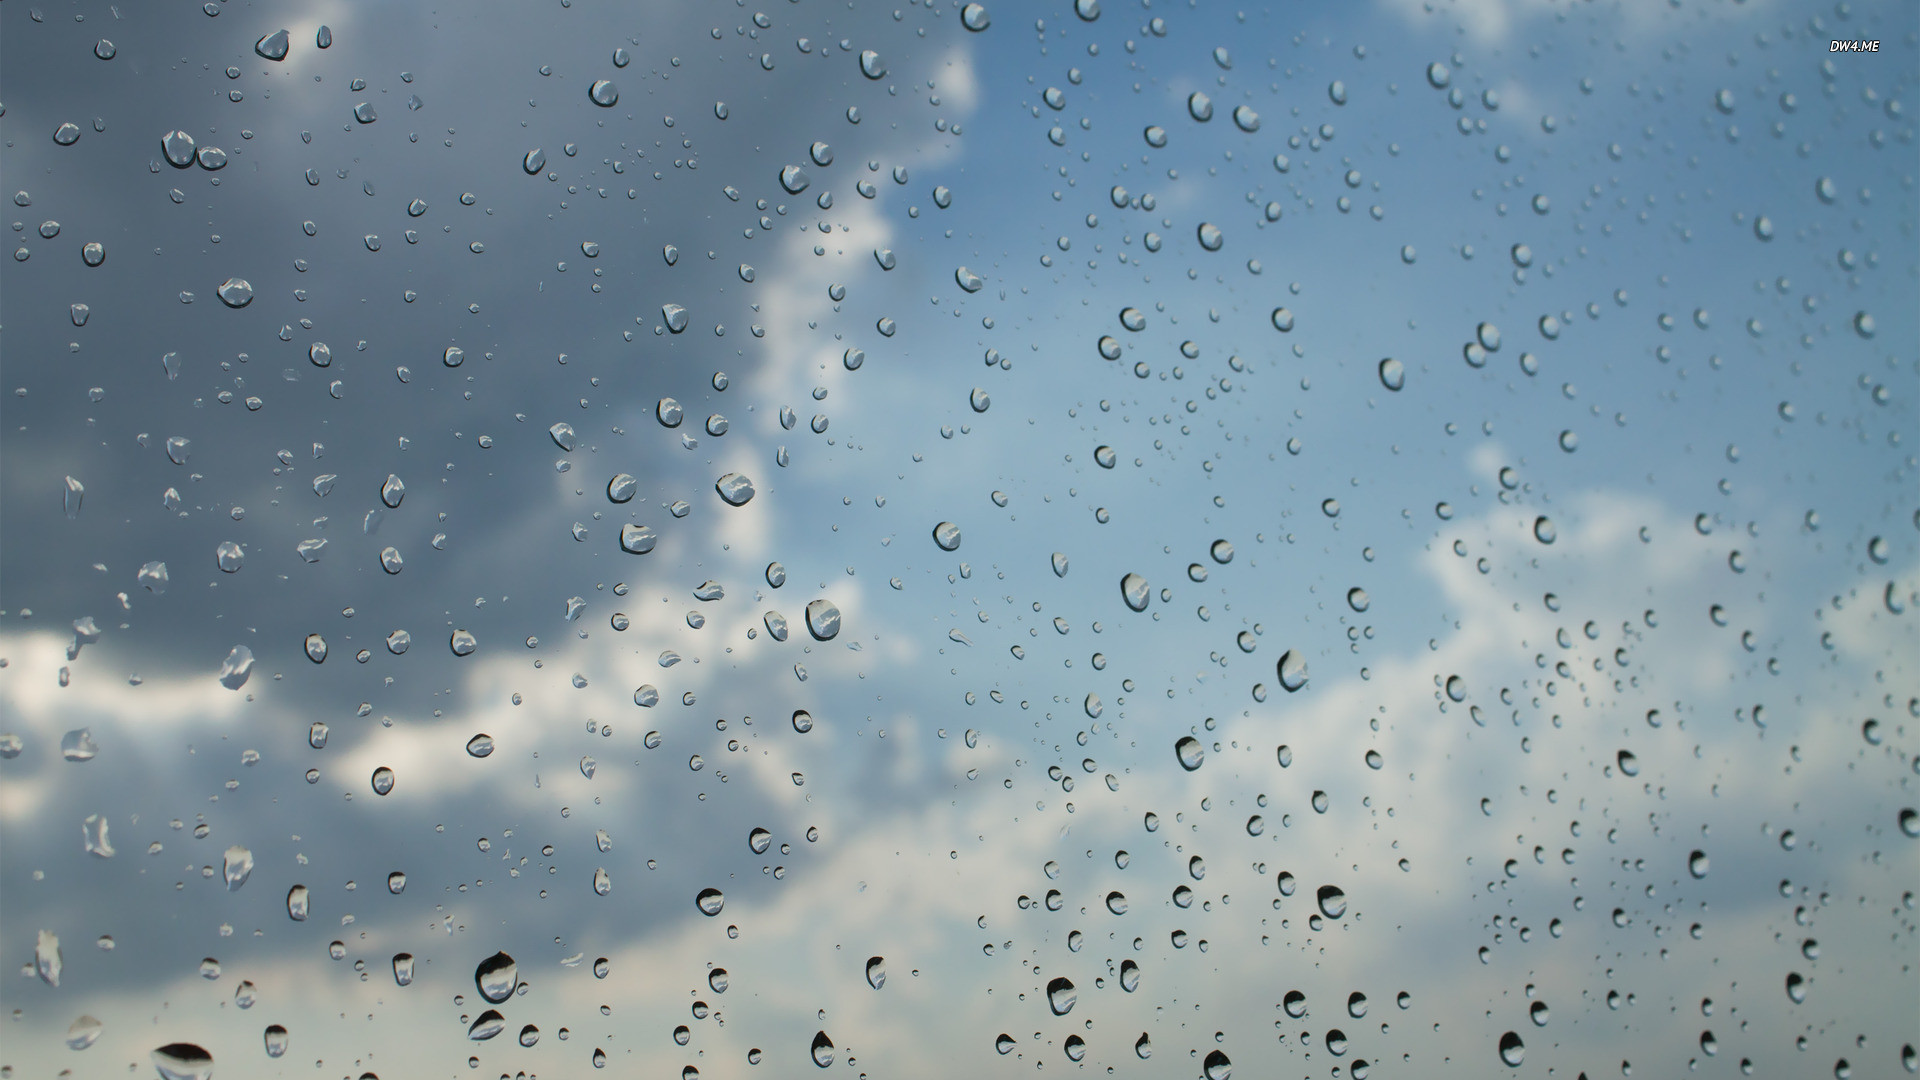 1920x1080 Raindrops and clouds wallpaper - 588866